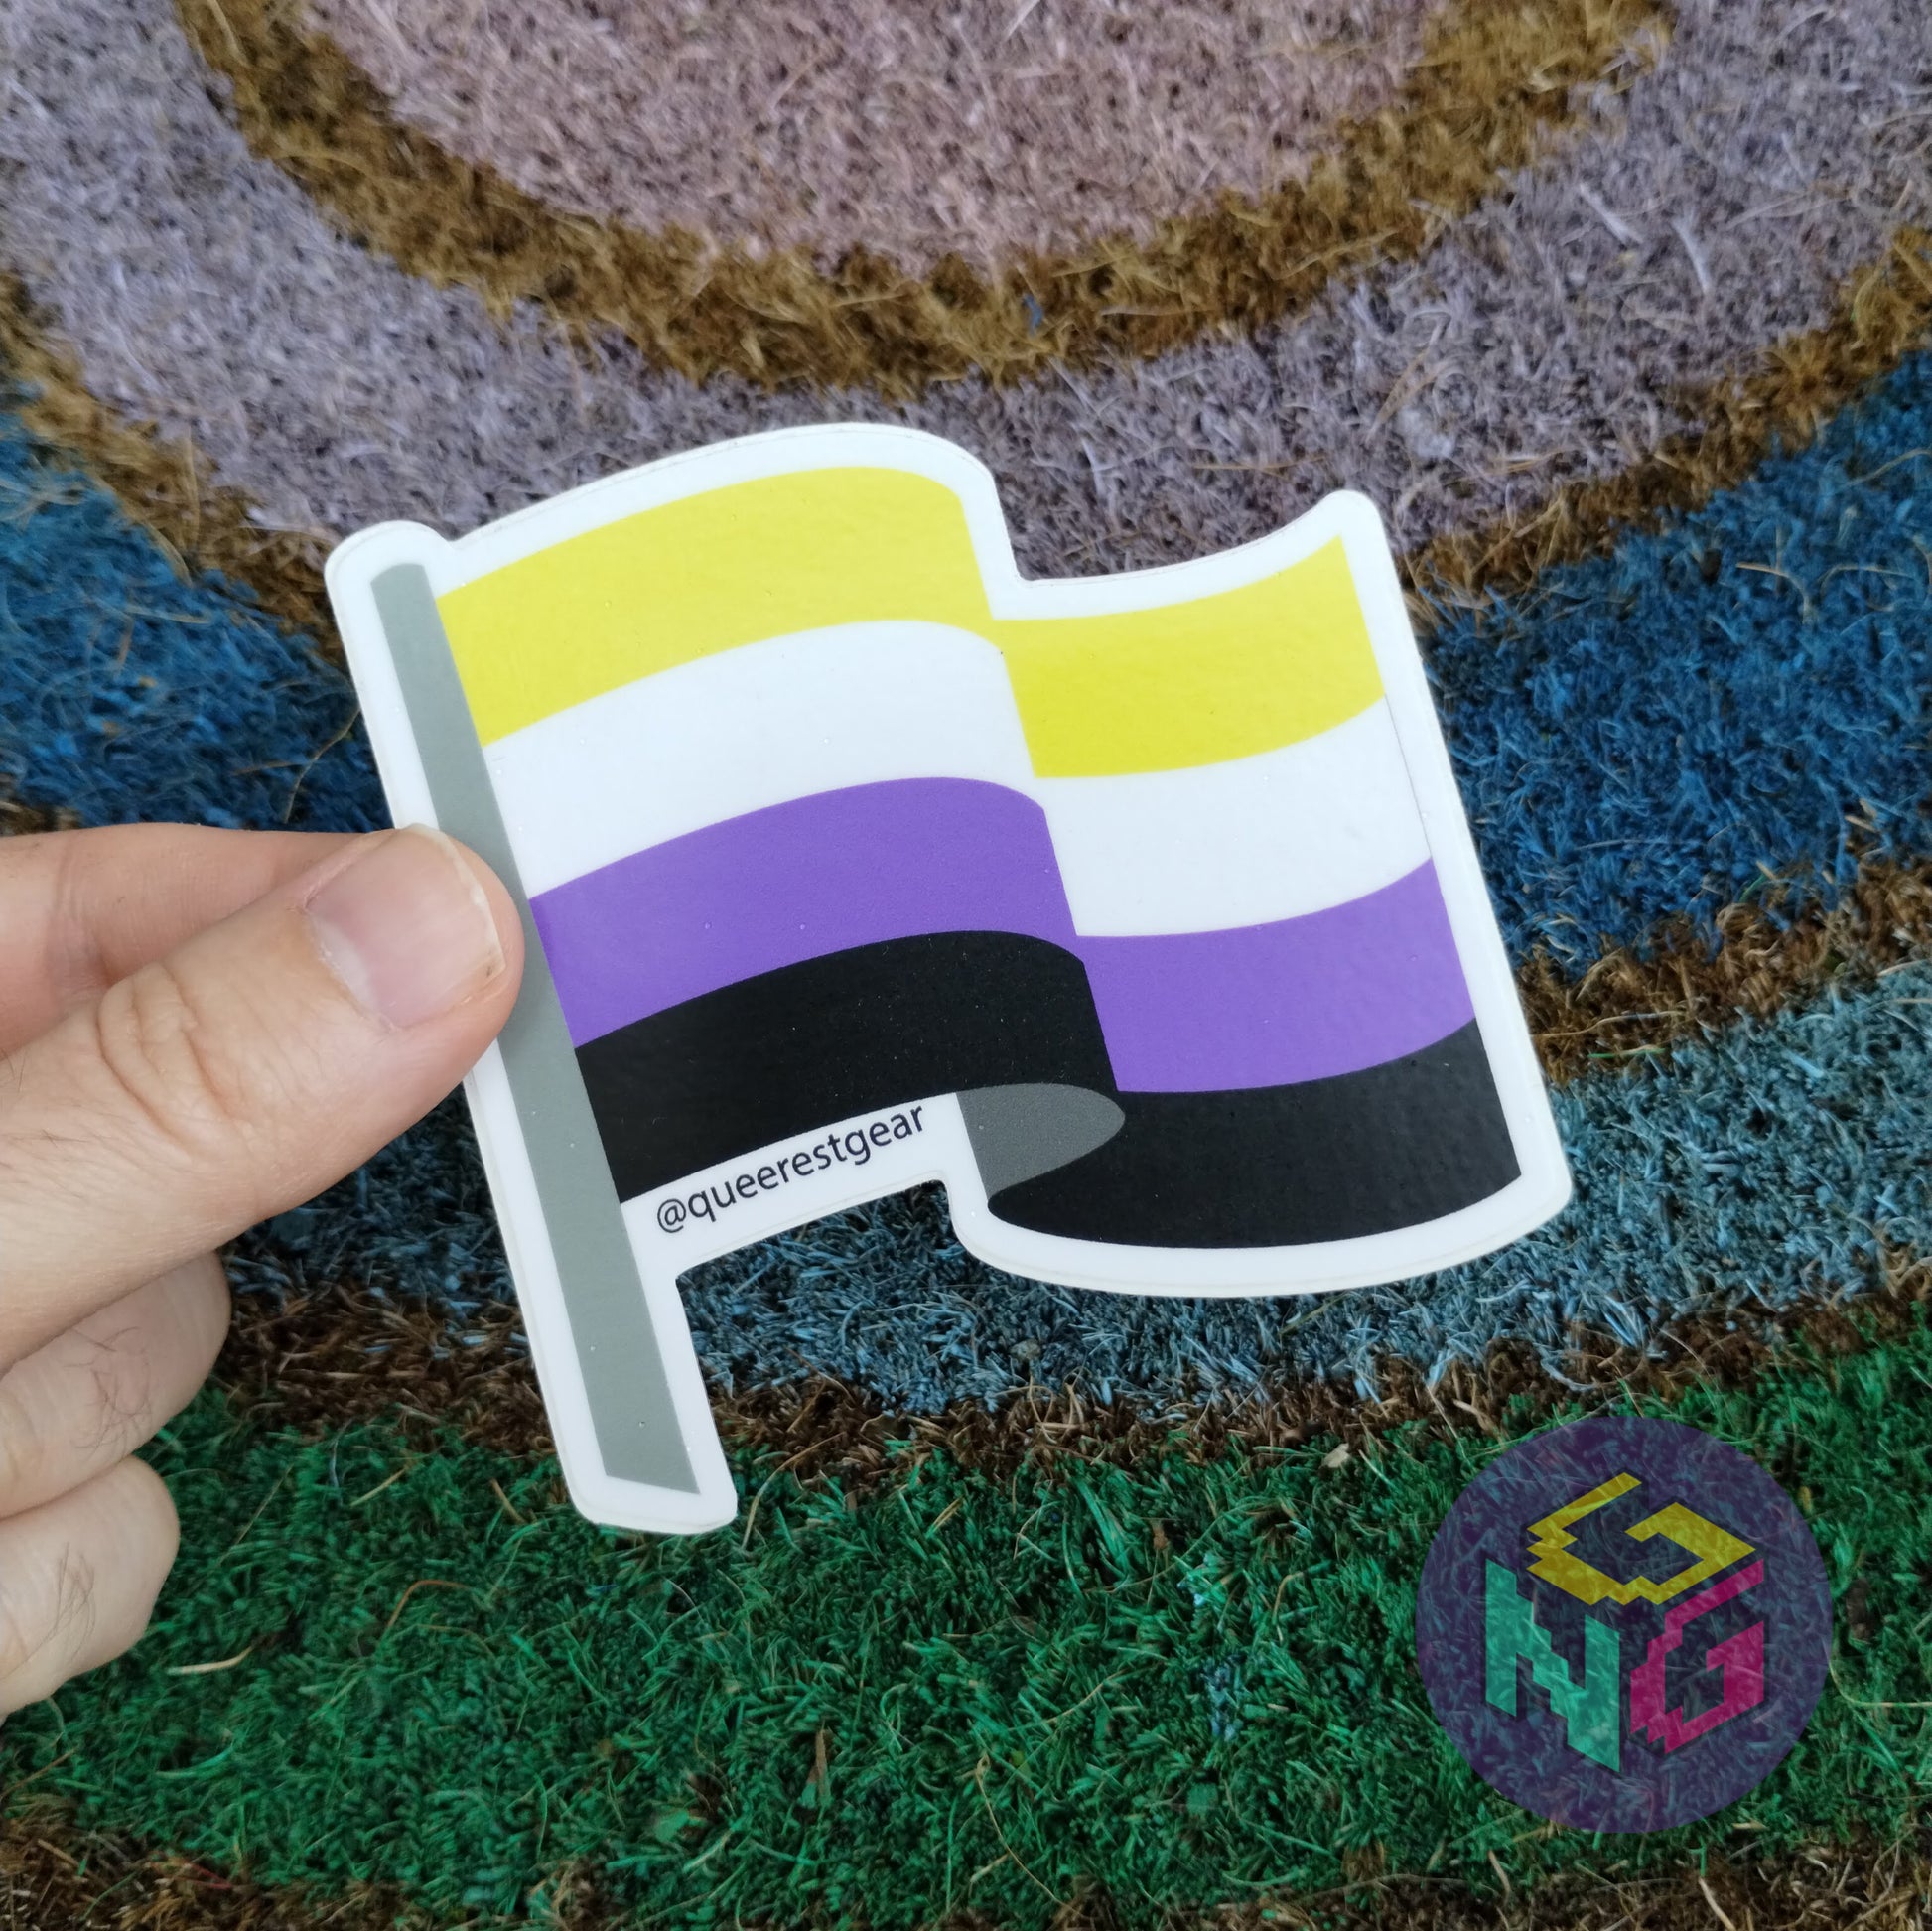 nonbinary flag sticker held between finger and thumb in front of rainbow welcome mat